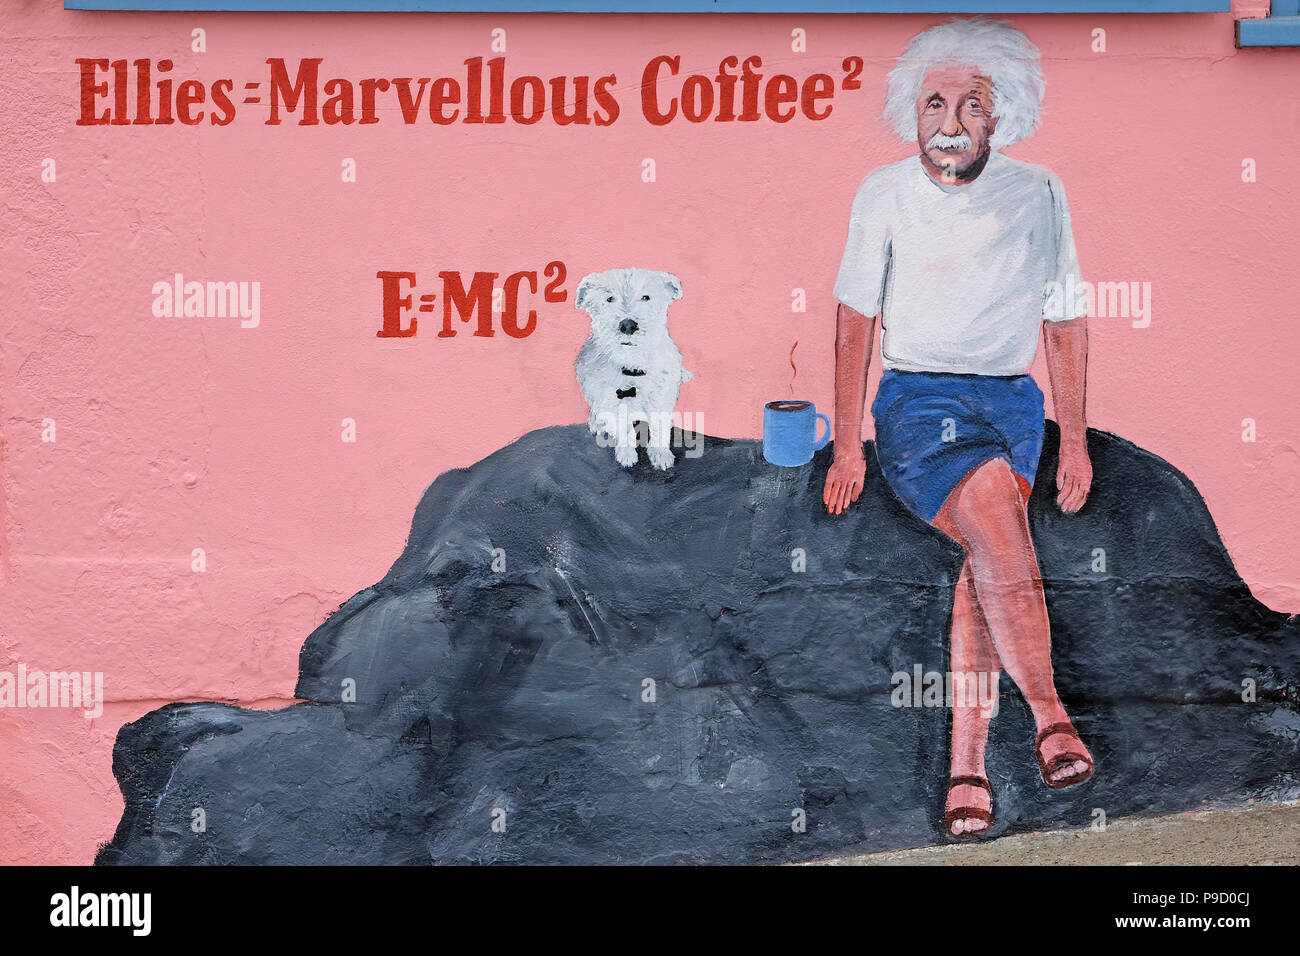 ellies marvellous coffee painted wall sign, sheringham, north norfolk, england Stock Photo